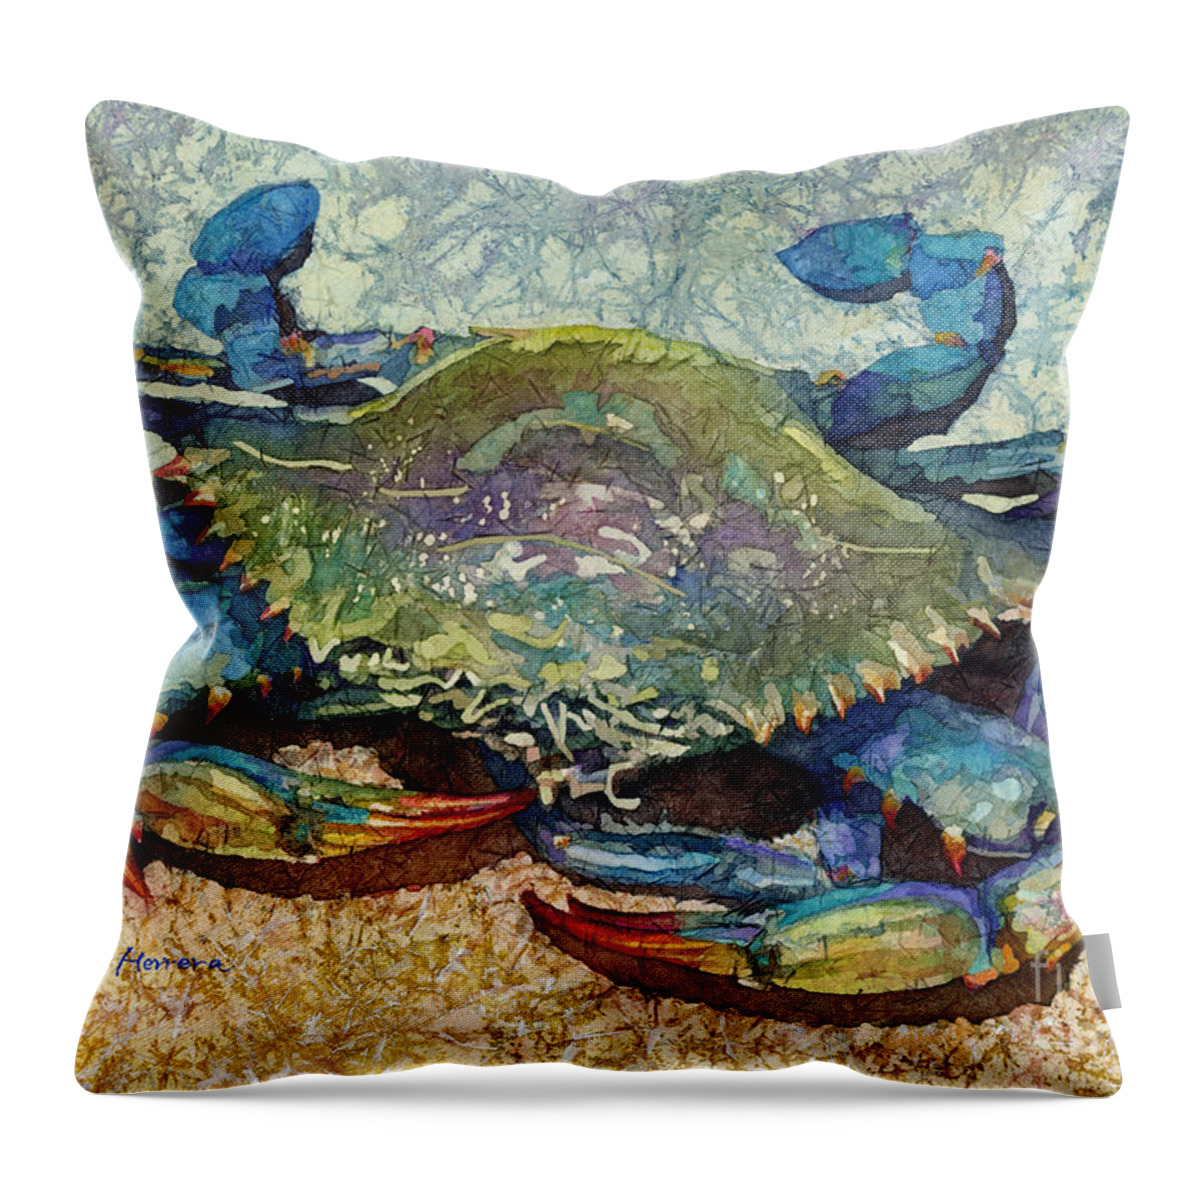 Crab Throw Pillow featuring the painting Blue Crab by Hailey E Herrera